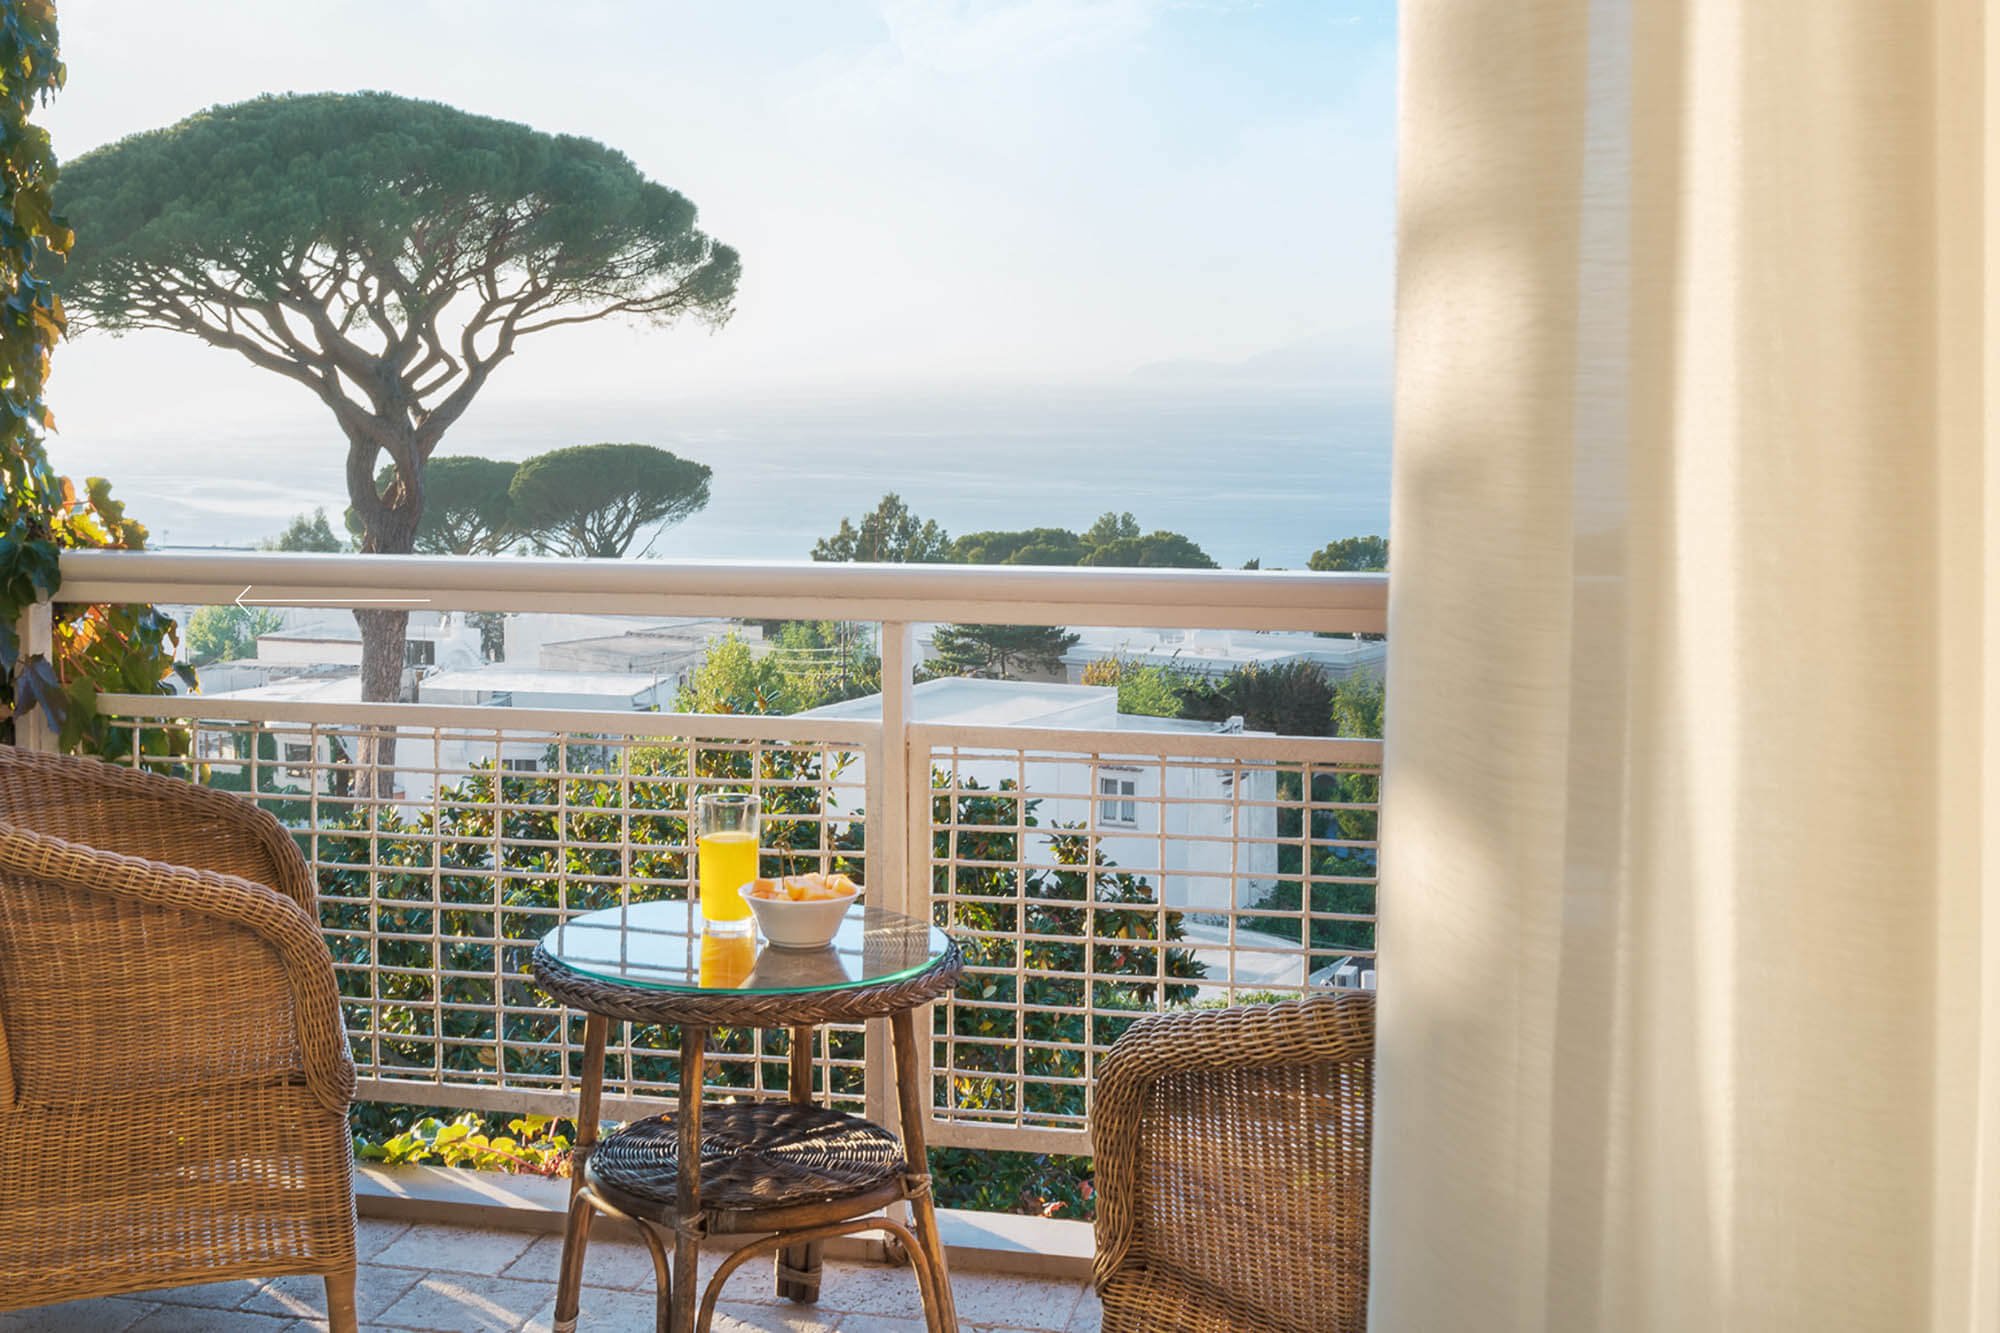 Room views from one of the best luxury hotels in Capri, Capri Palace Jumeirah